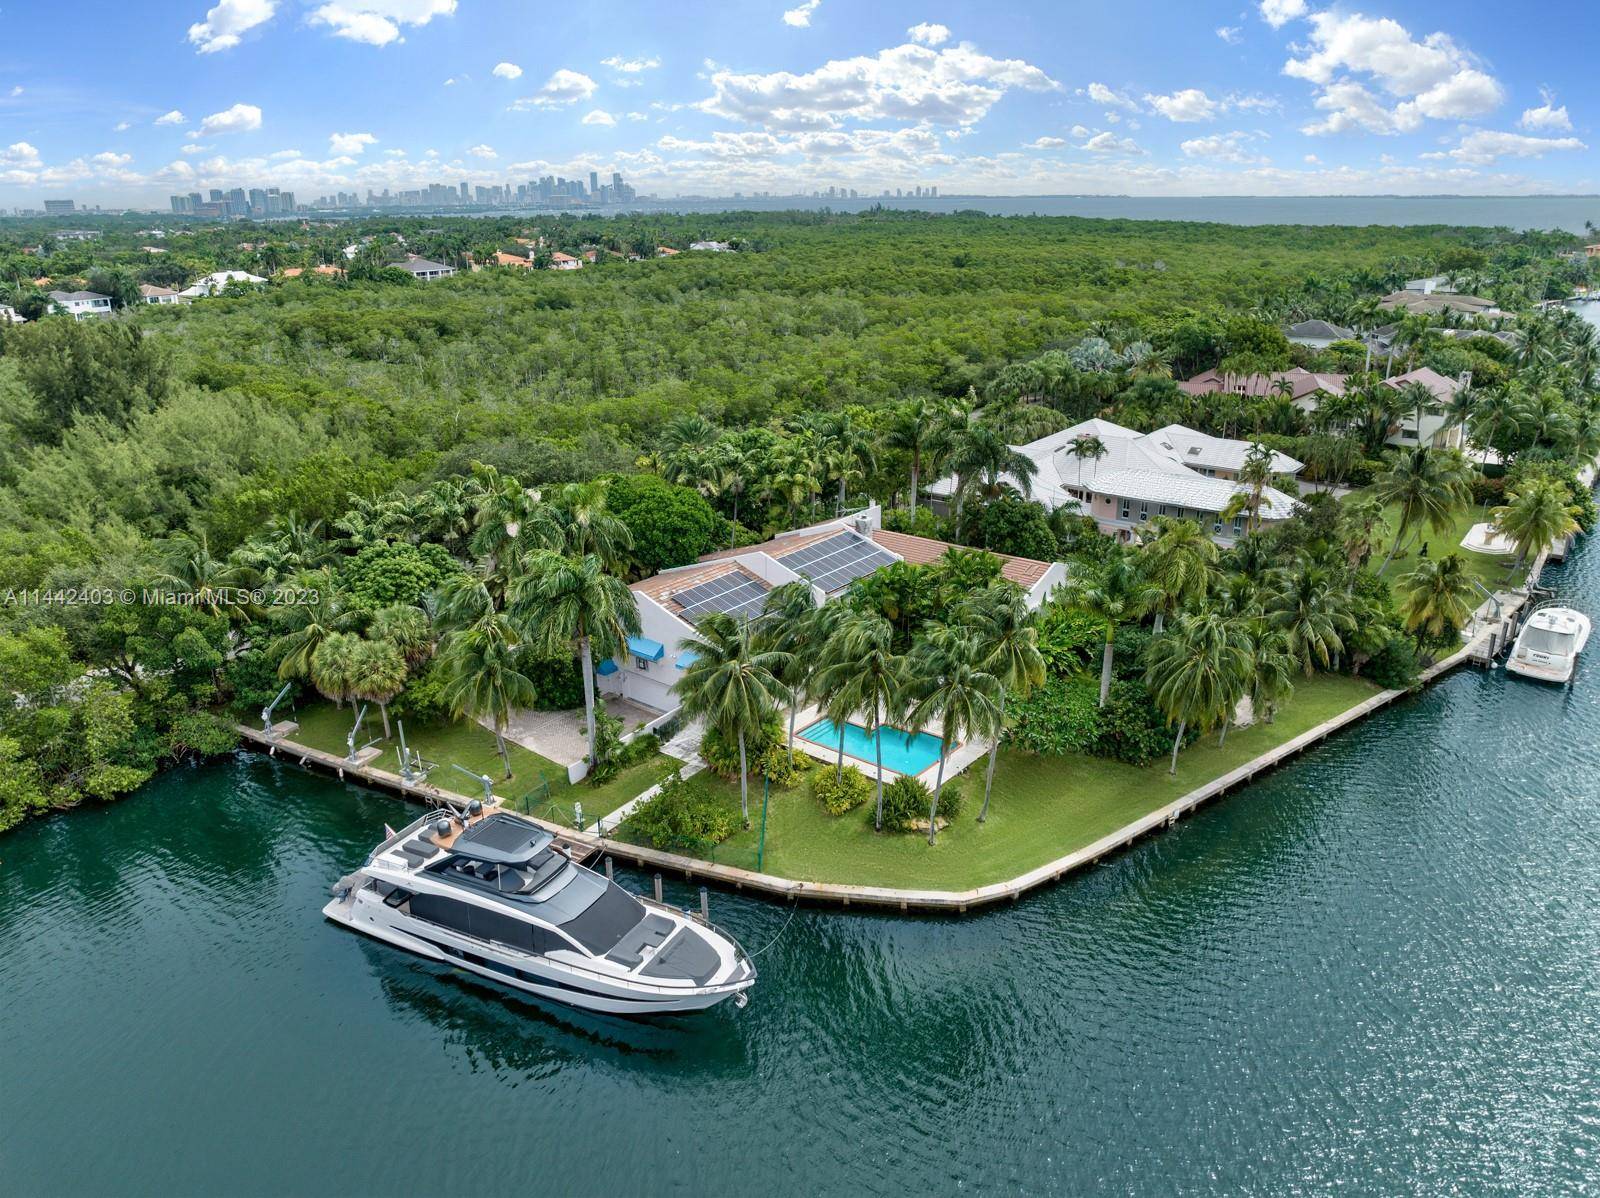 PRIME waterfront property in the exclusive gated community of Gables Estates.